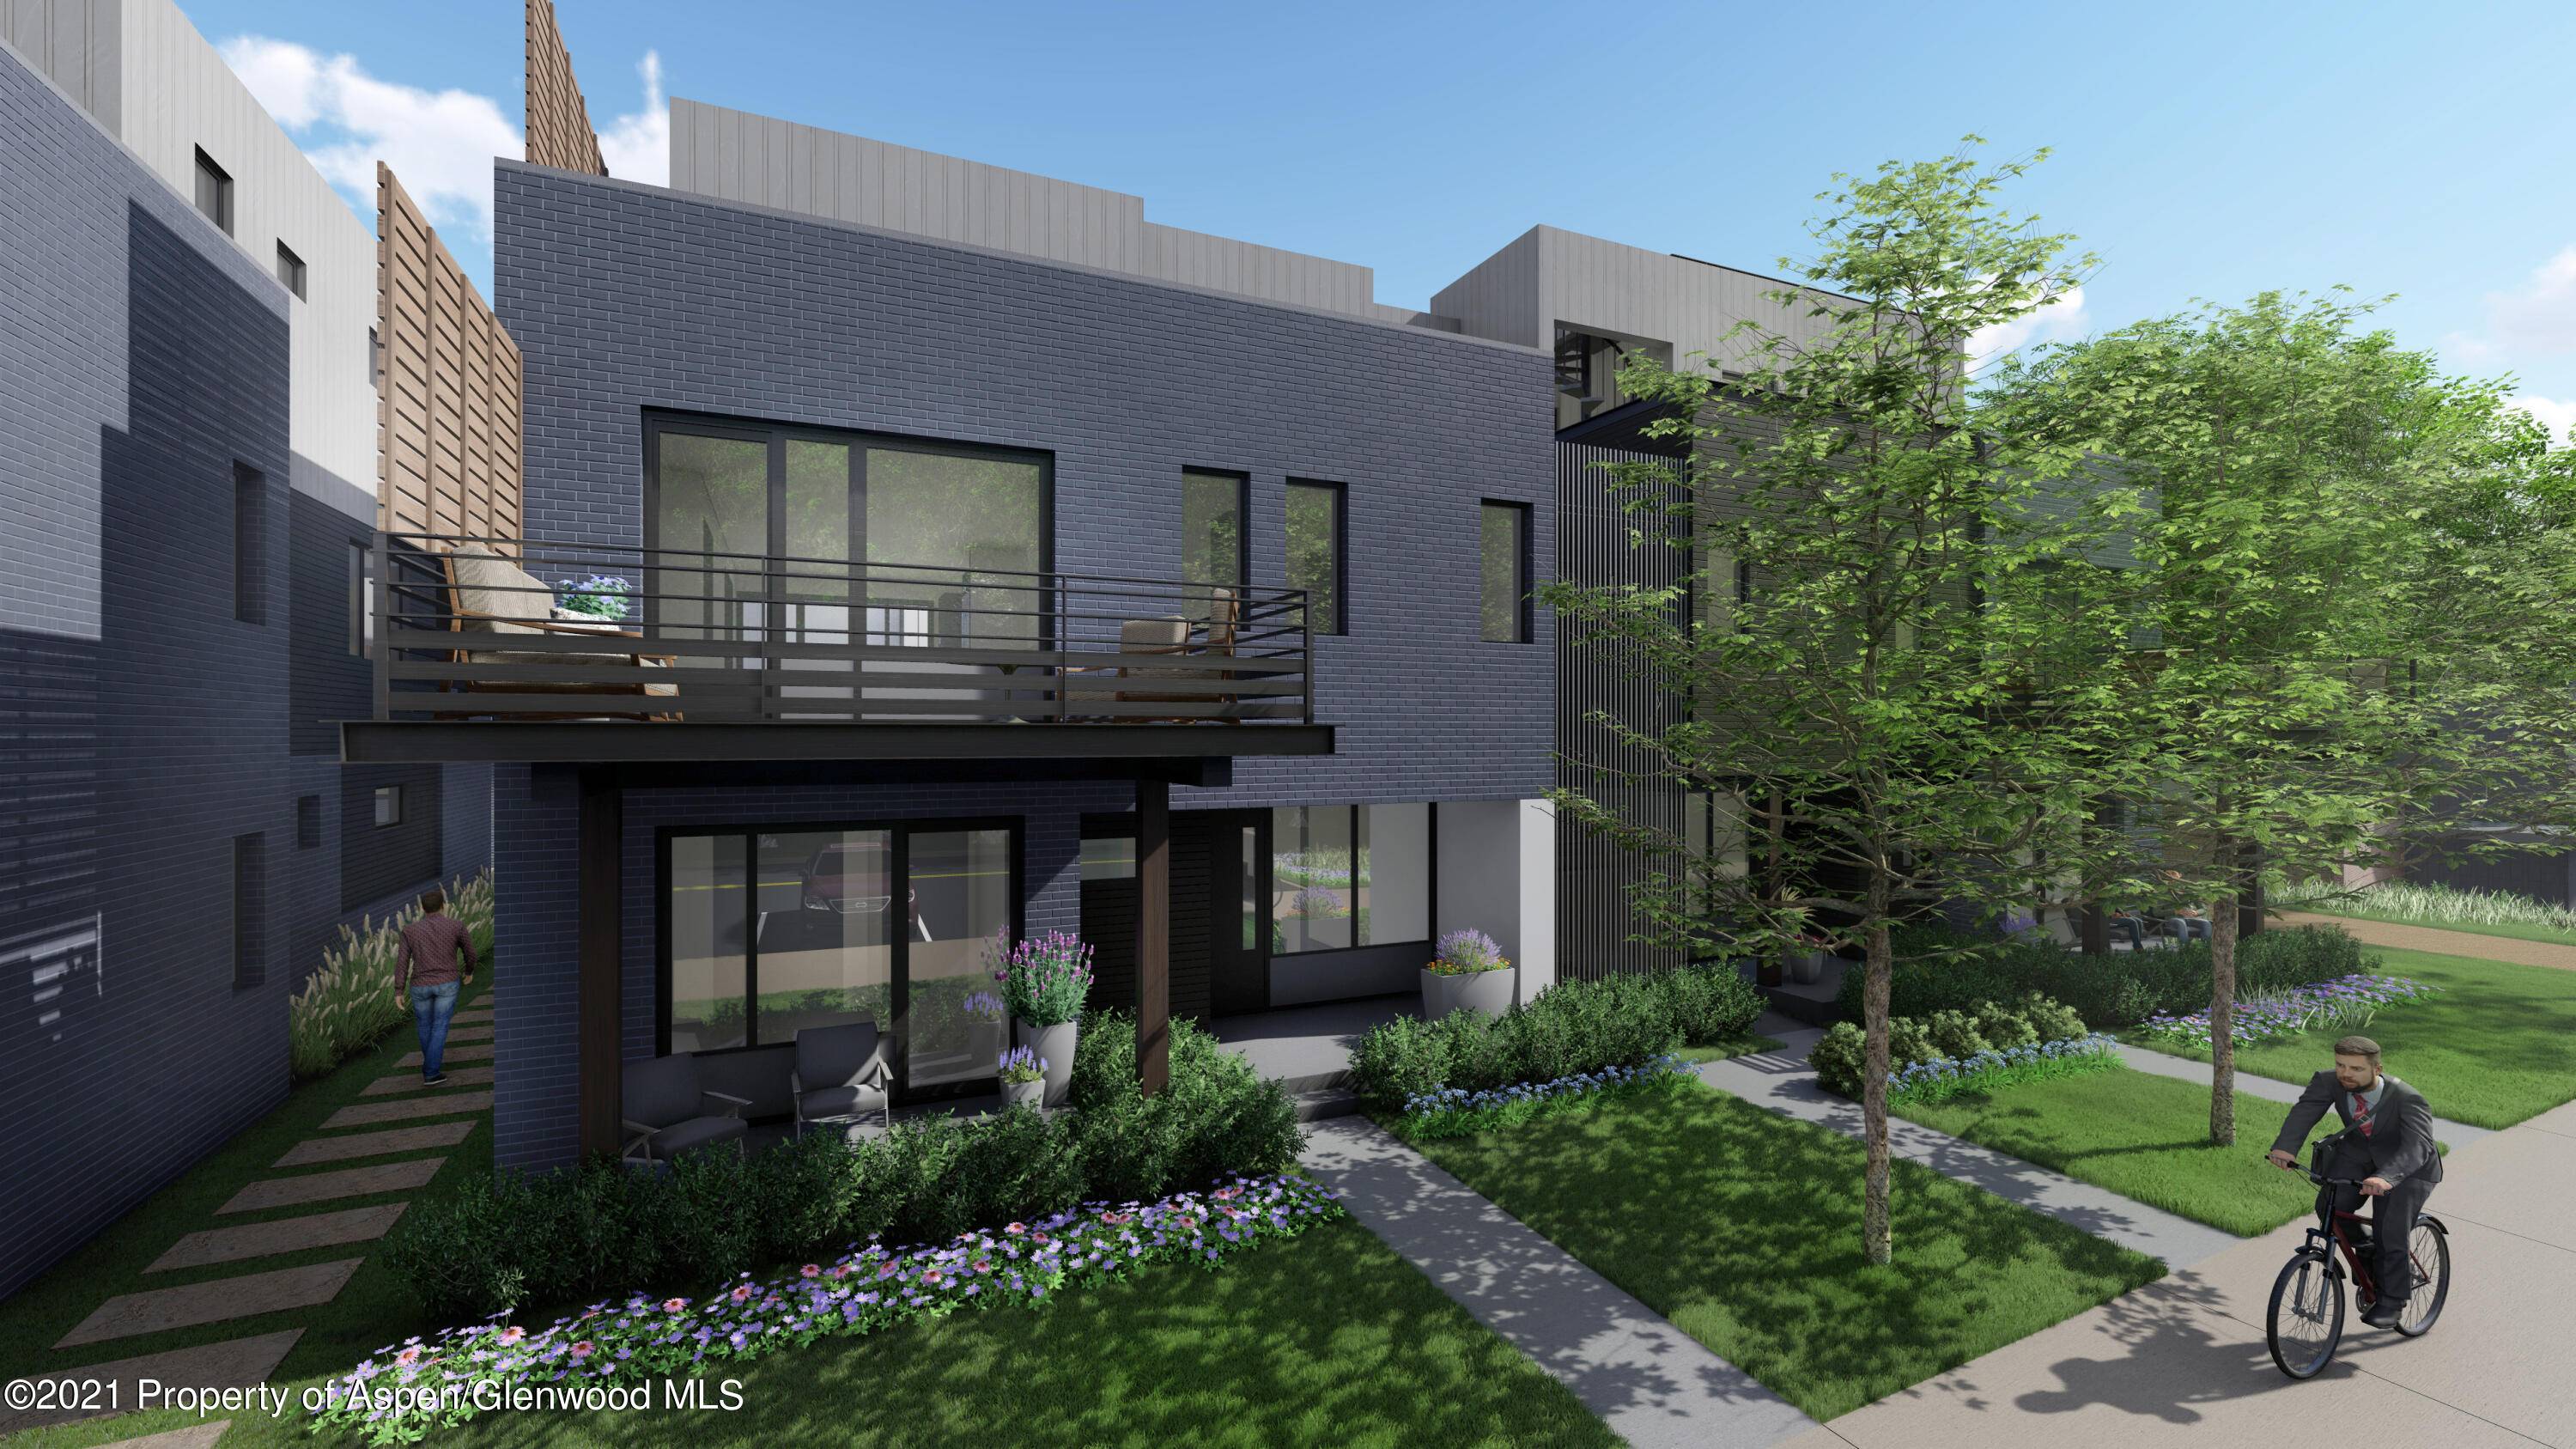 Introducing Park Place a collection of three residences within the Basalt River Park neighborhood along the Roaring Fork River.